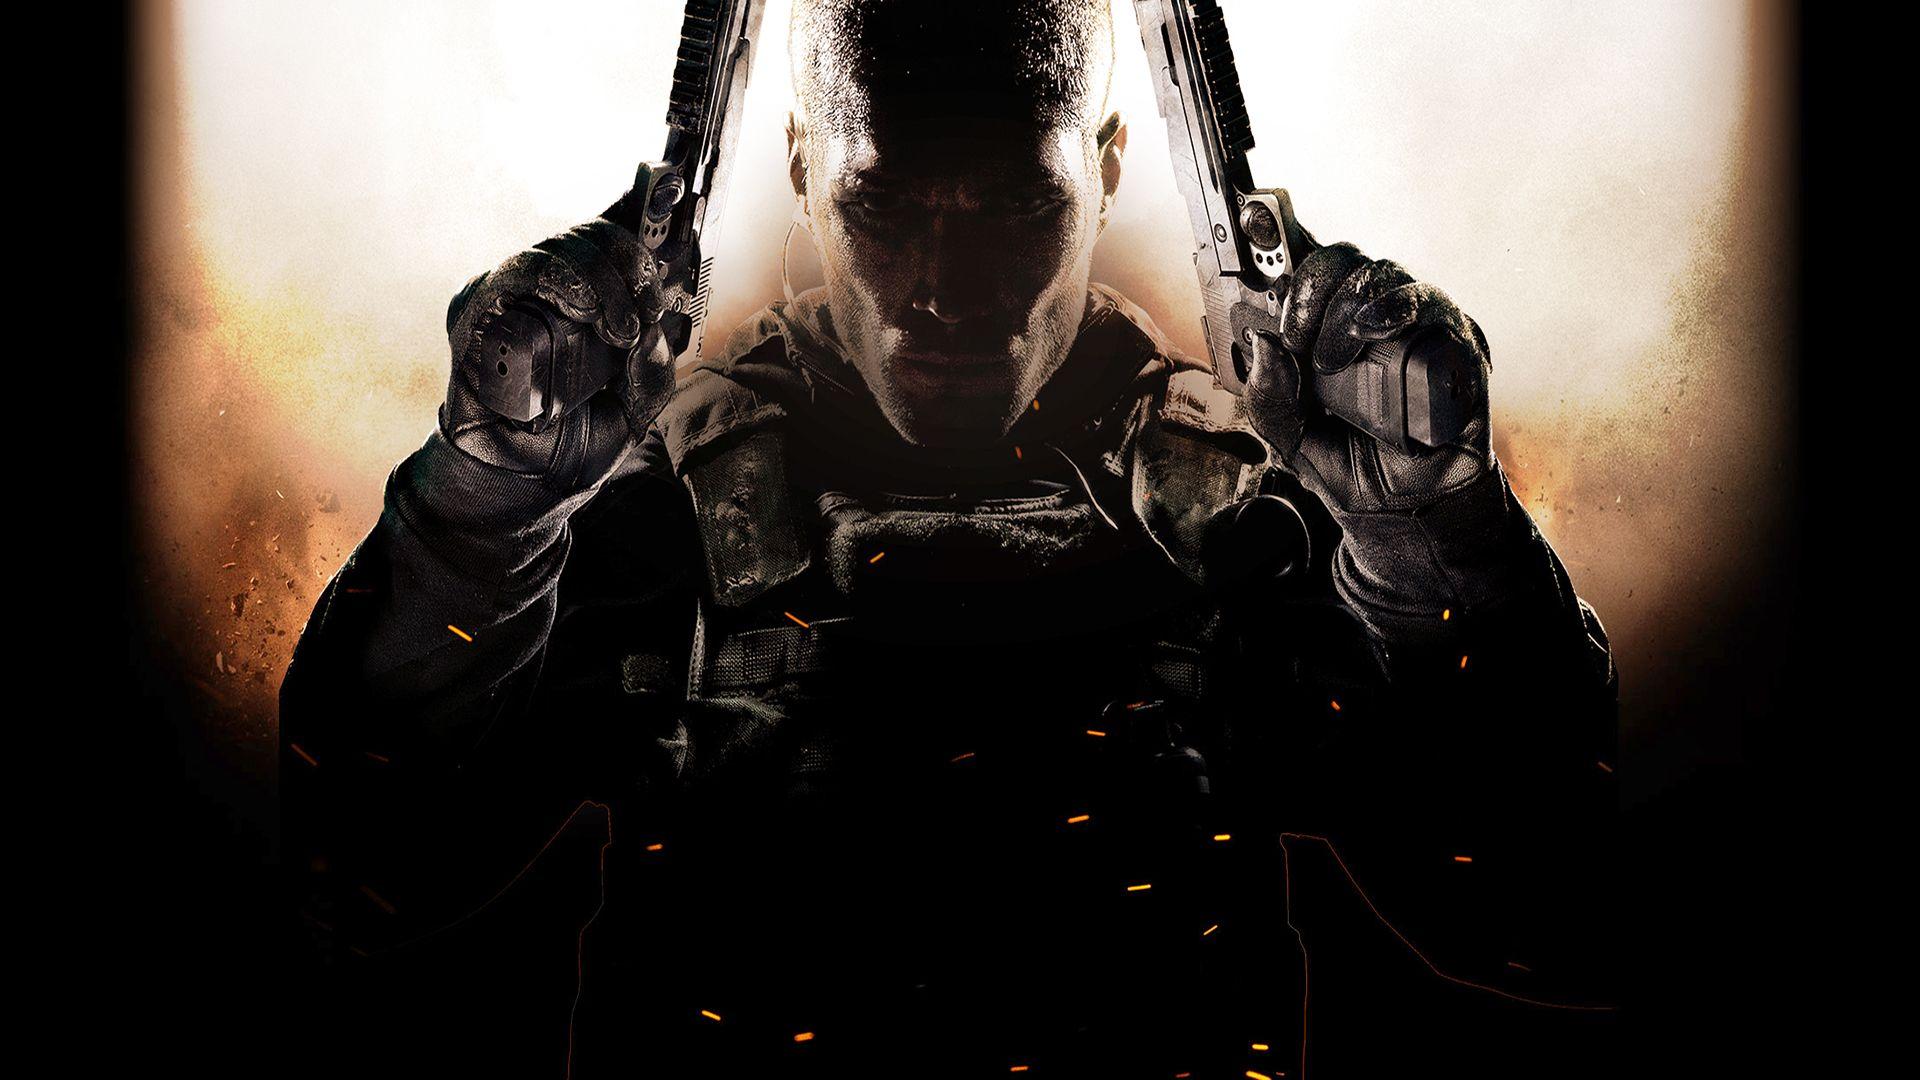 Wallpaper Of Call Of Duty Black Ops 2 Gallery (77 Plus) PIC